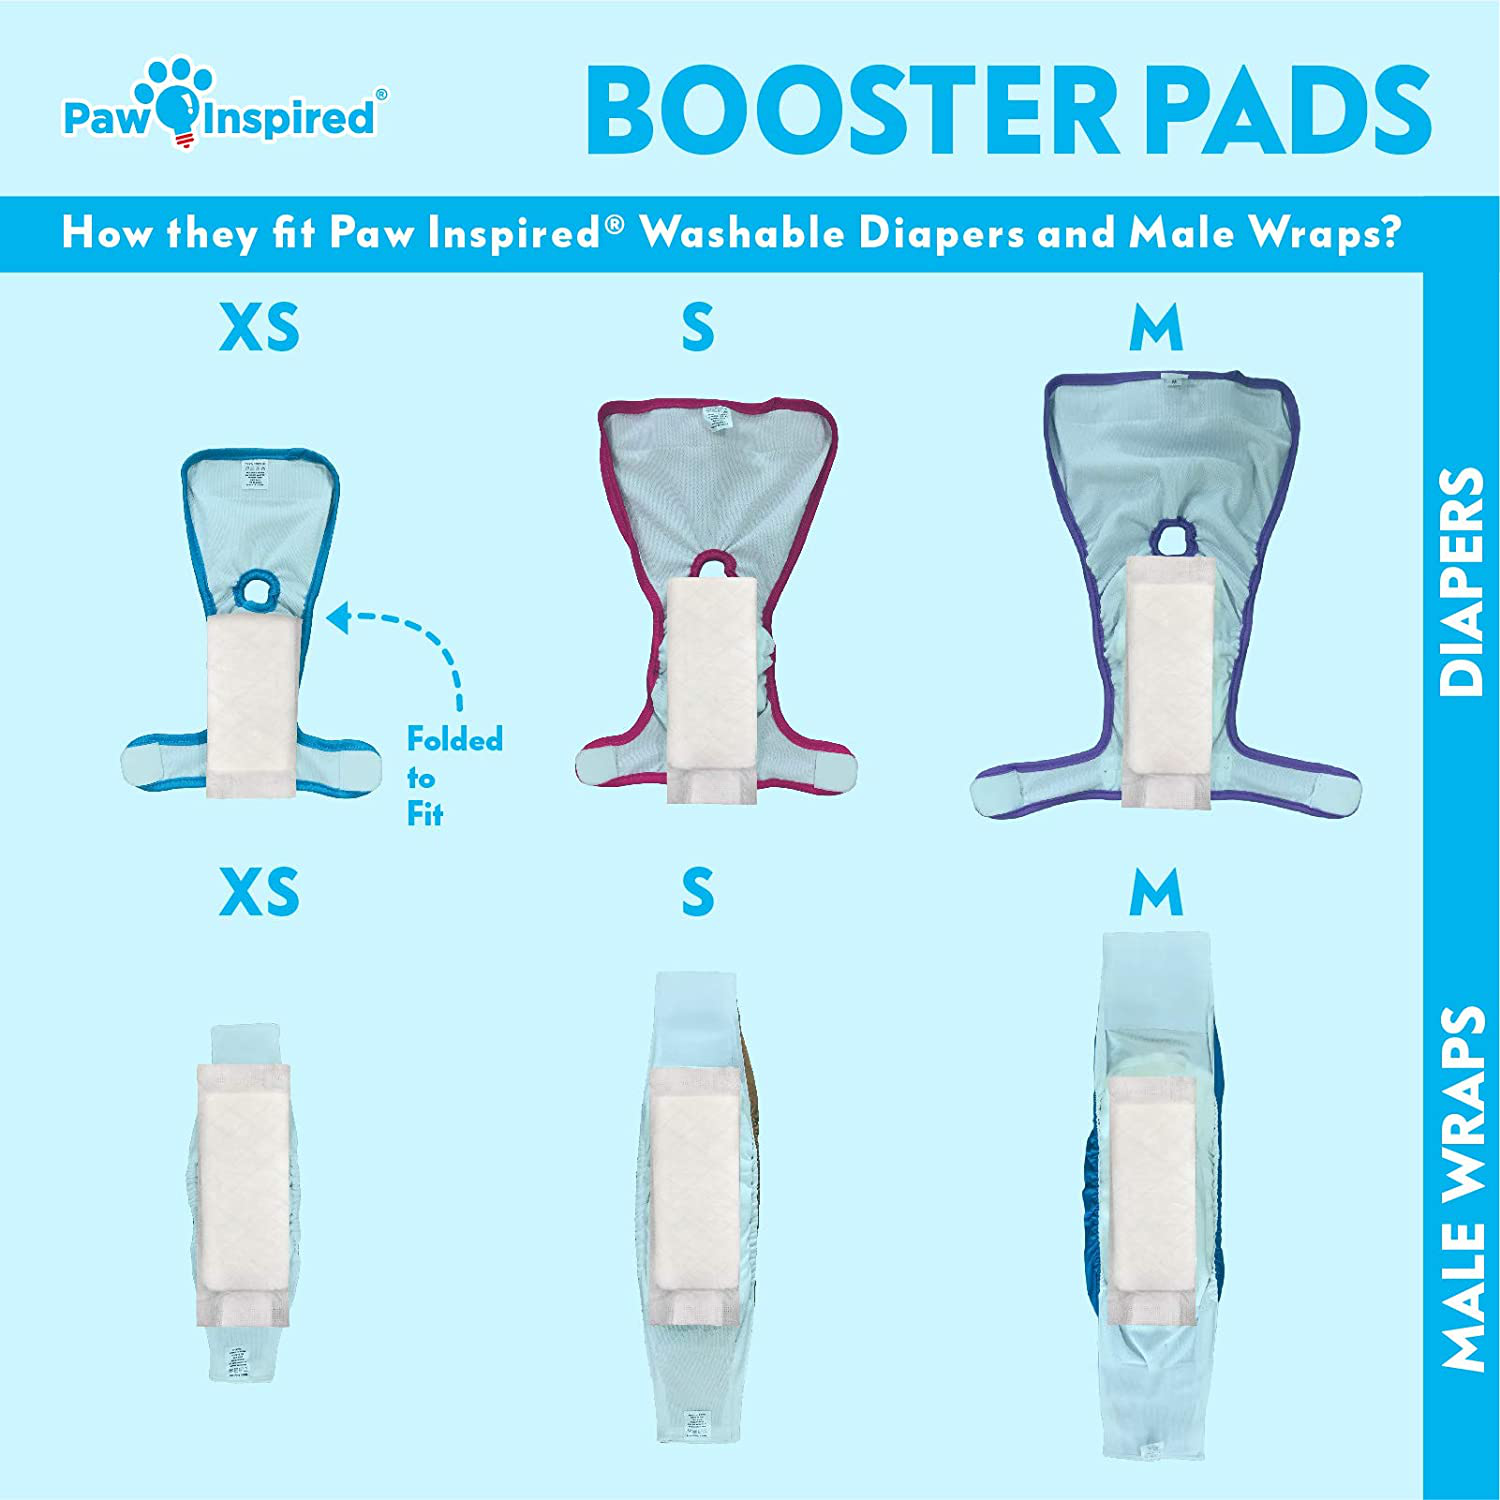 Paw Inspired Dog Diaper Pads | Disposable Diaper Liners | Booster Pad Inserts Fit Most Female and Male Washable and Disposable Dog Diapers and Belly Bands | Adds Absorbency, Stops Leaks